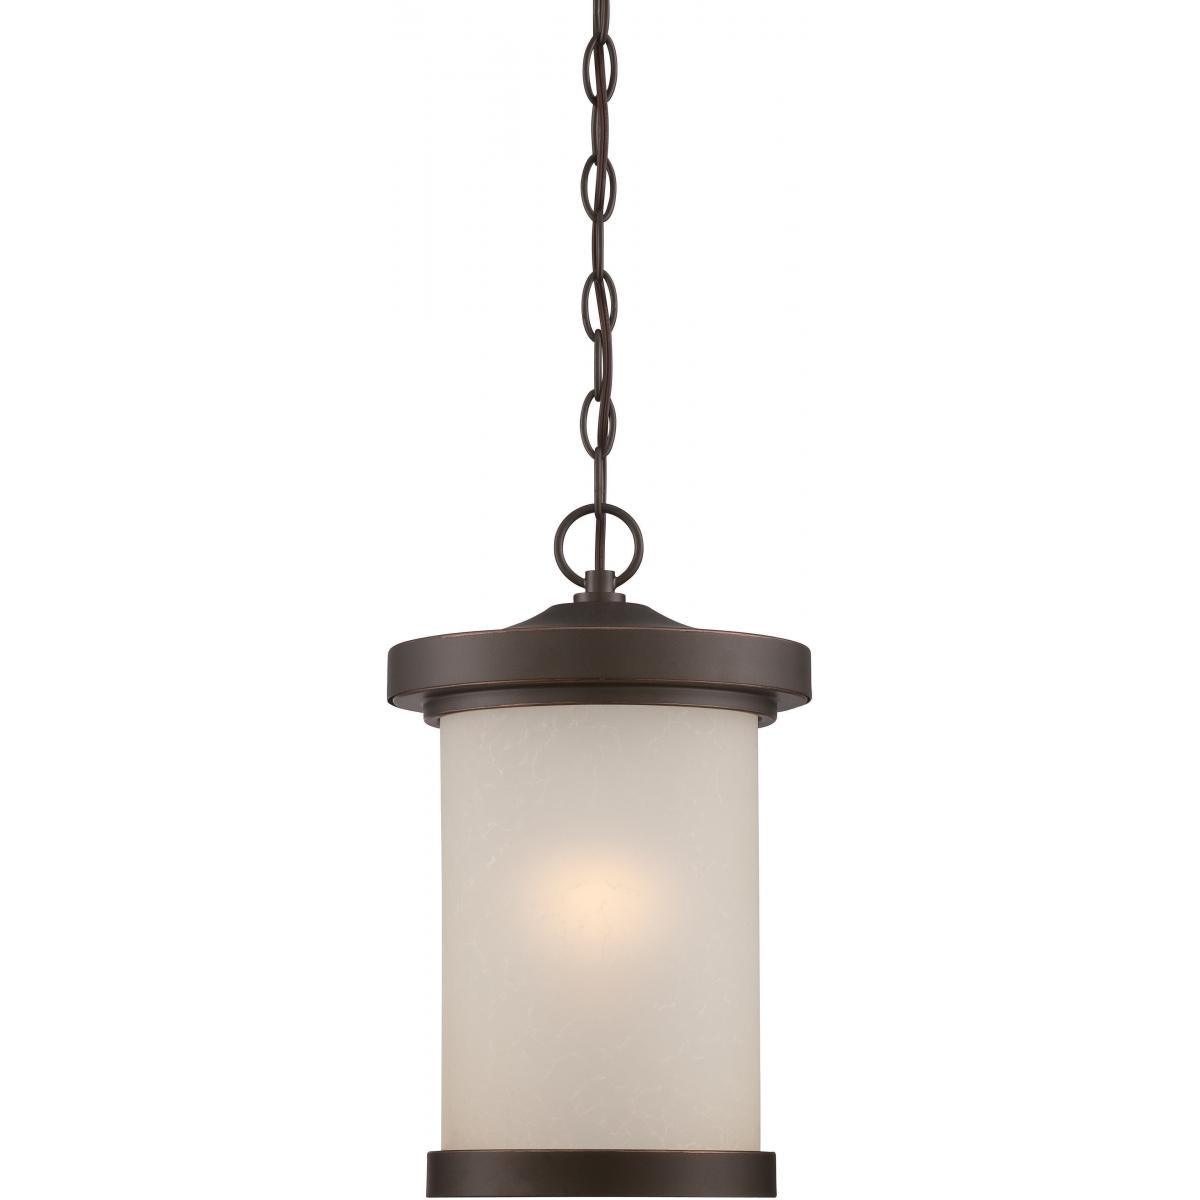 Diego 15 In. LED Outdoor Hanging Lantern Bronze finish